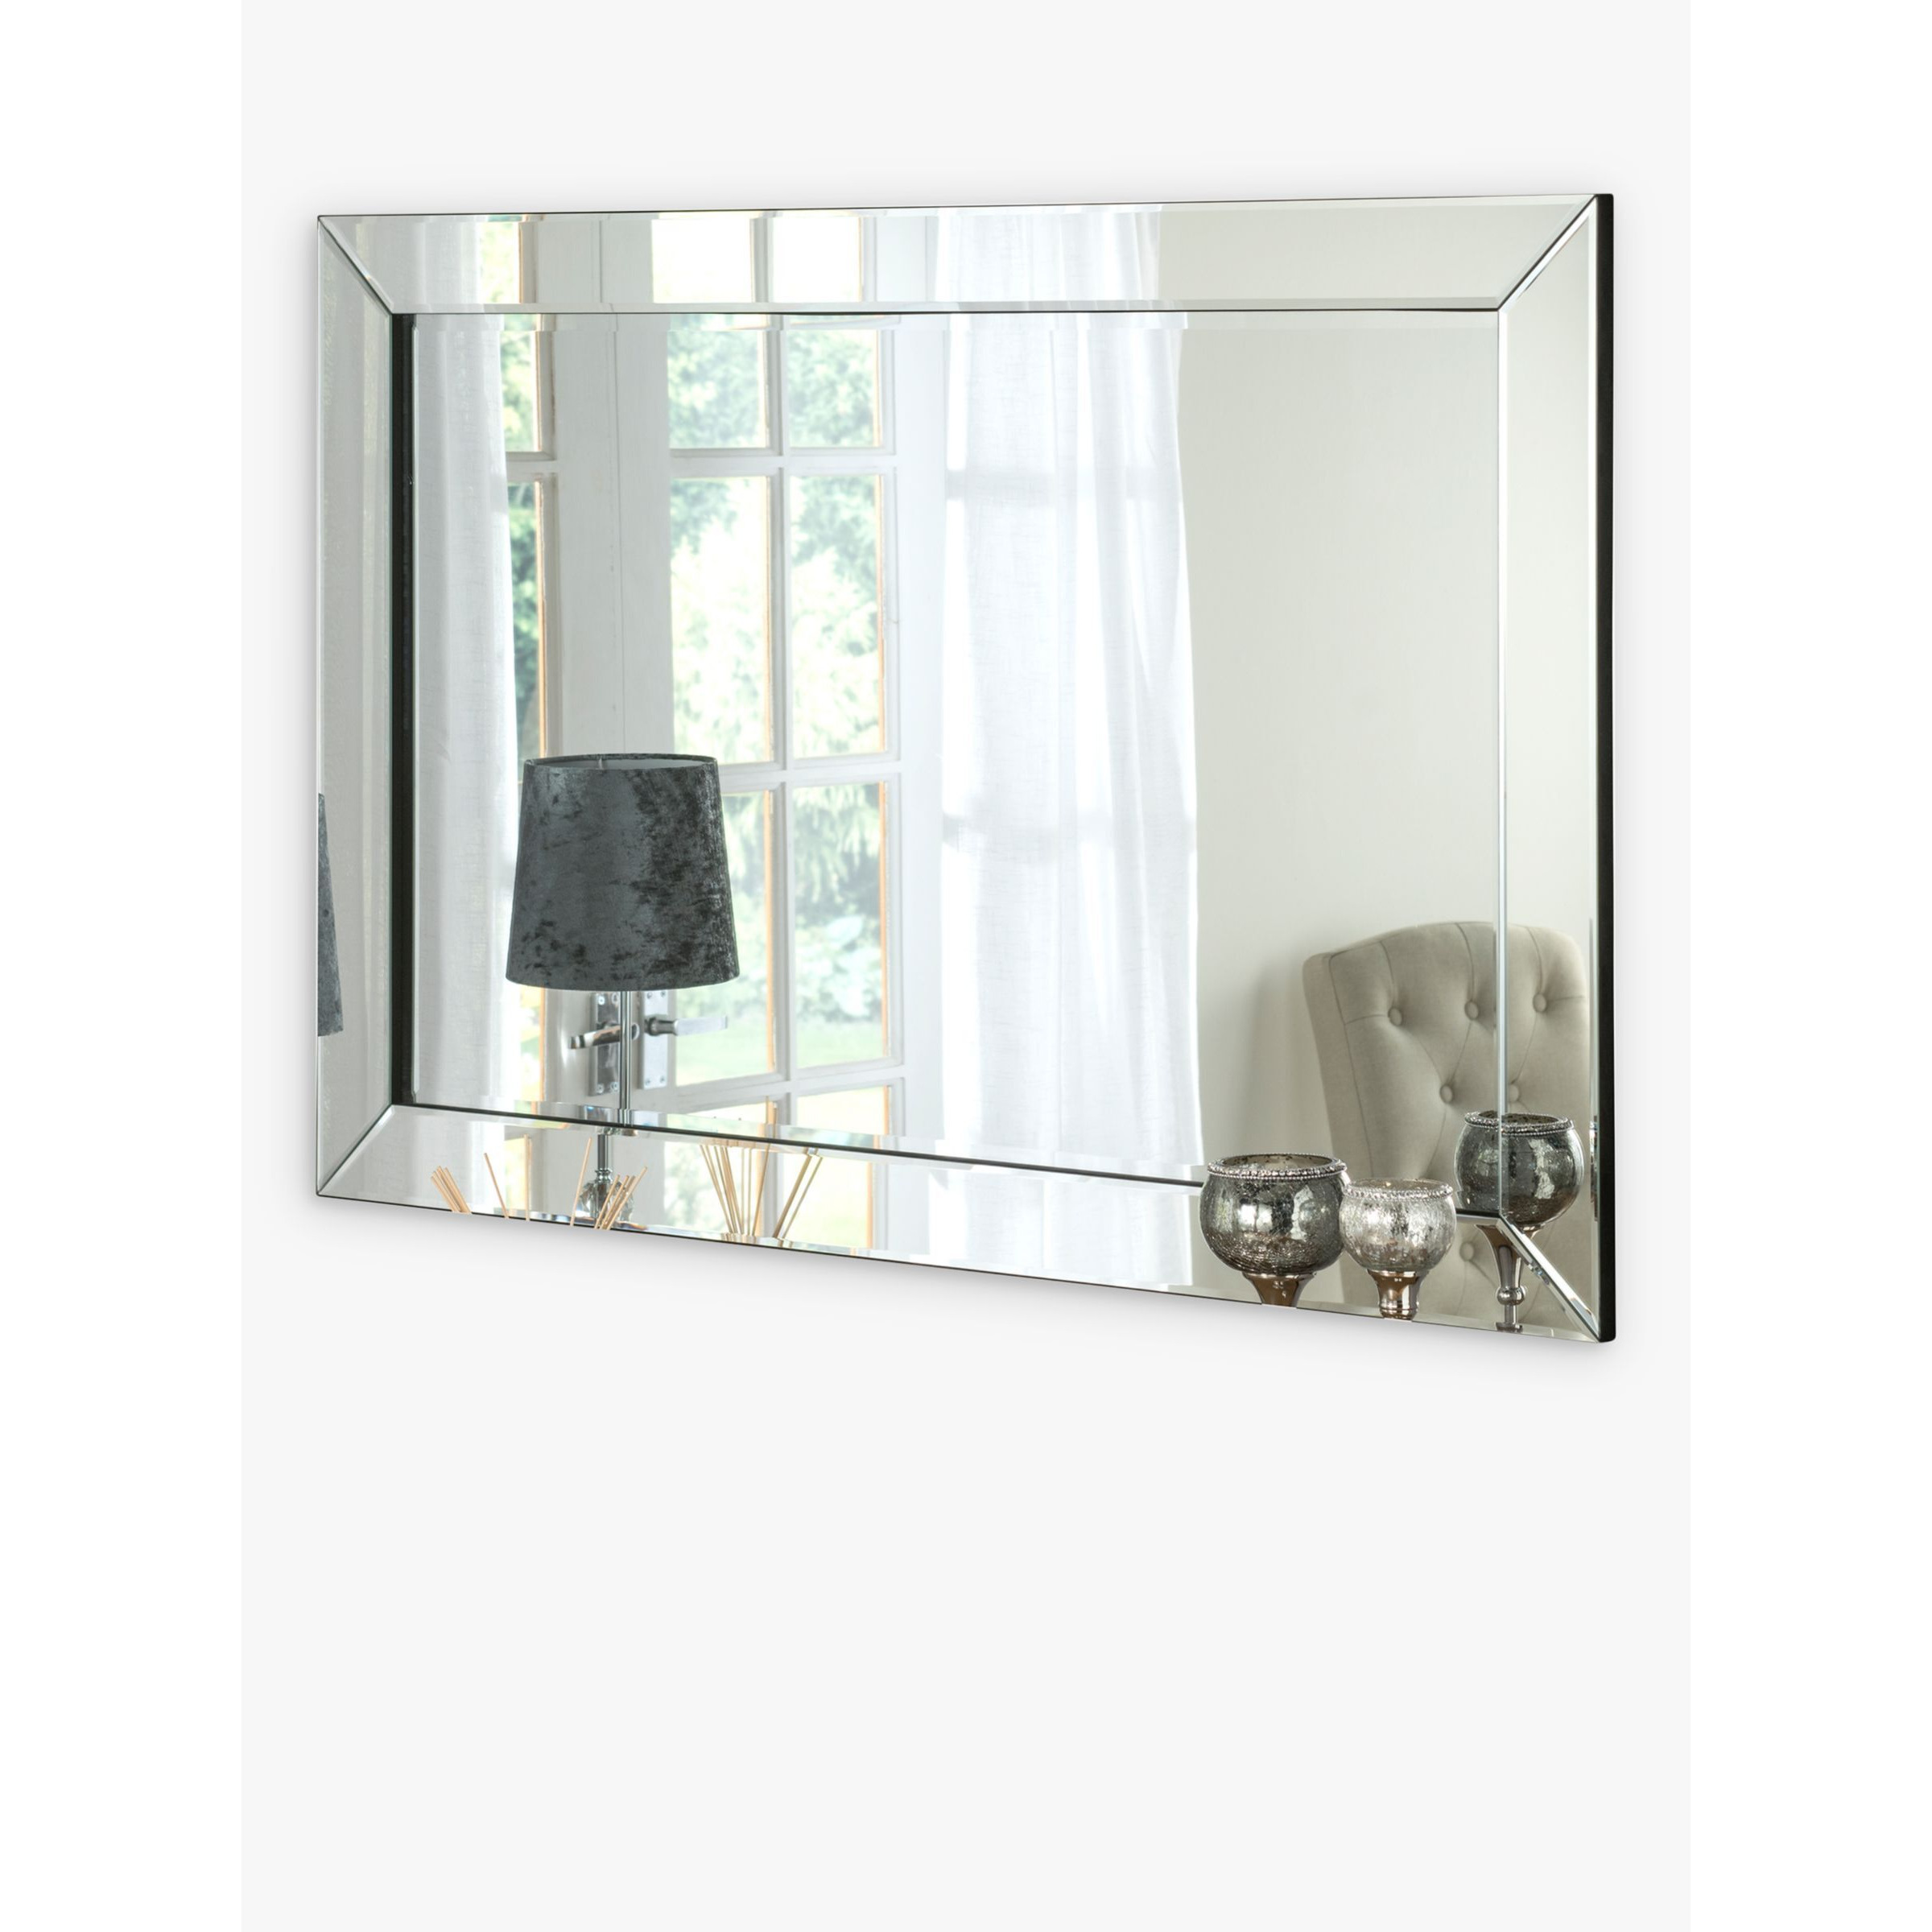 Yearn Bevelled Mitre Glass Rectangular Frame Wall Mirror, Clear/Black - image 1